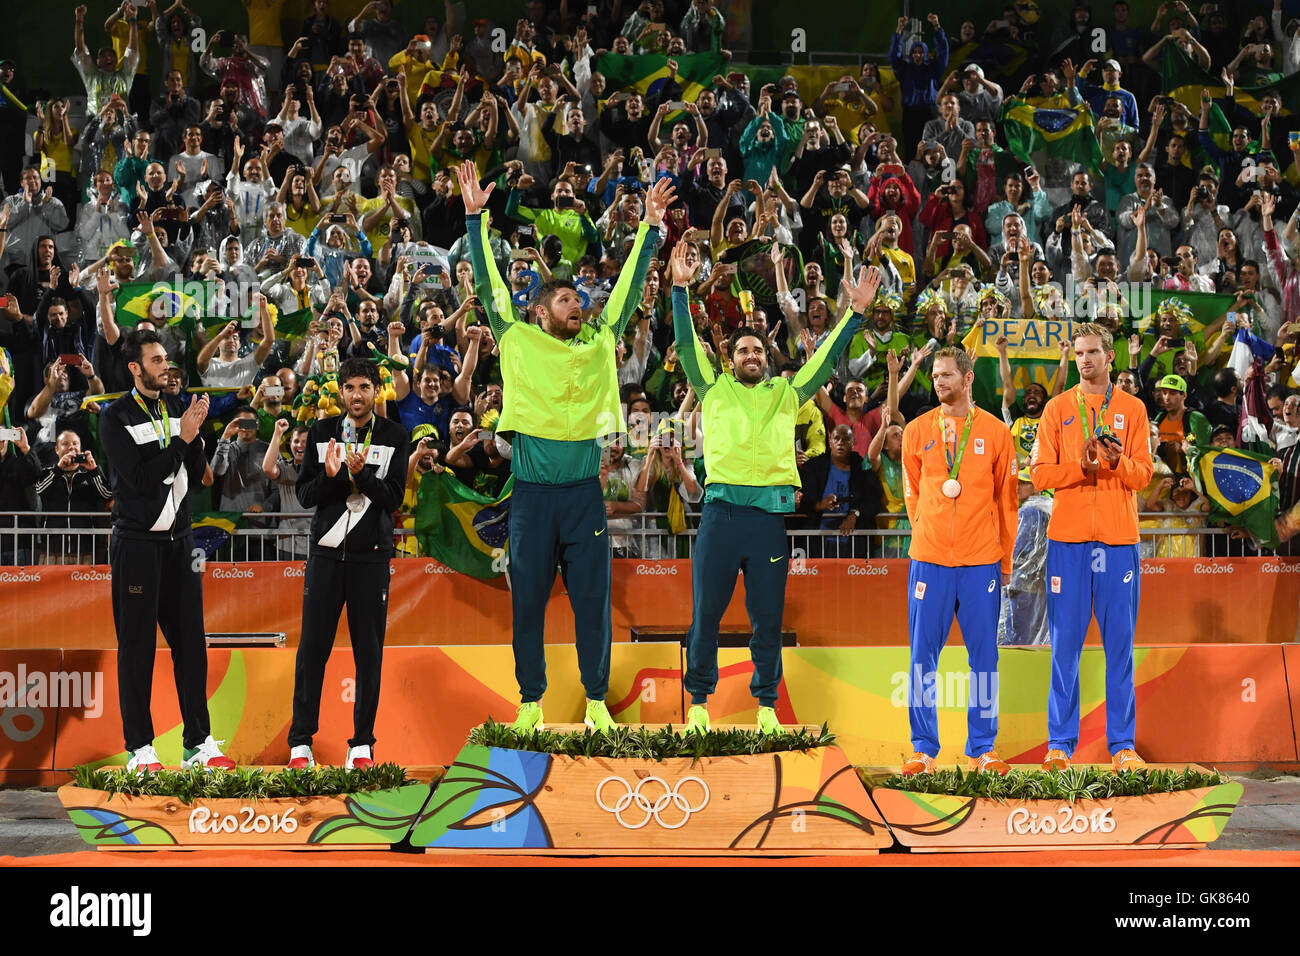 Rio de Janeiro, Brazil. 18th Aug, 2016. (L-R) Silver medalists Paolo Nicolai and Daniele Lupo of Italy, gold medalists Alison Cerutti and Bruno Oscar Schmidt of Brazil, and bronze medalists Alexander Brouwer and Robert Meeuwsen of the Netherlands stand on the podium for the Men's Beach Volleyball event during the Rio 2016 Olympic Games at Beach Volleyball Arena Copacabana in Rio de Janeiro, Brazil, 18 August 2016. Photo: Sebastian Kahnert/dpa/Alamy Live News Stock Photo